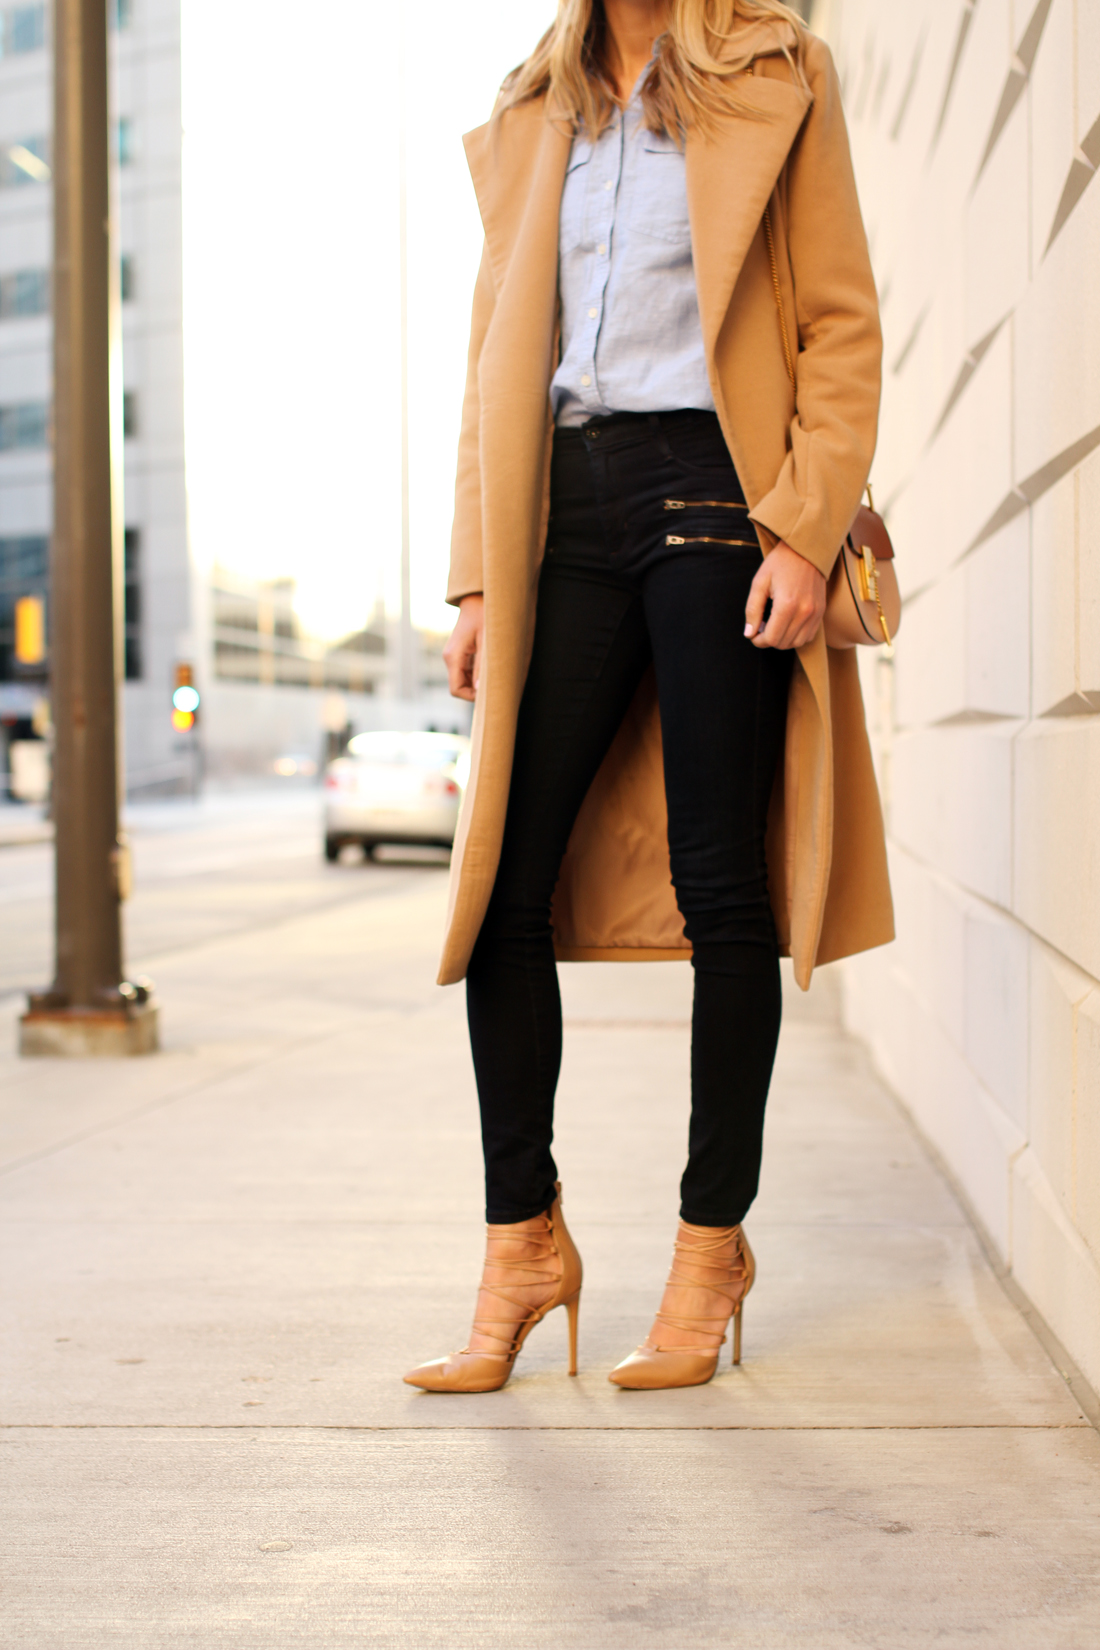 fashion-jackson-missguided-tan-long-wool-coat-james-jeans-crux-nude-lace-up-heels-blue-button-up-shirt